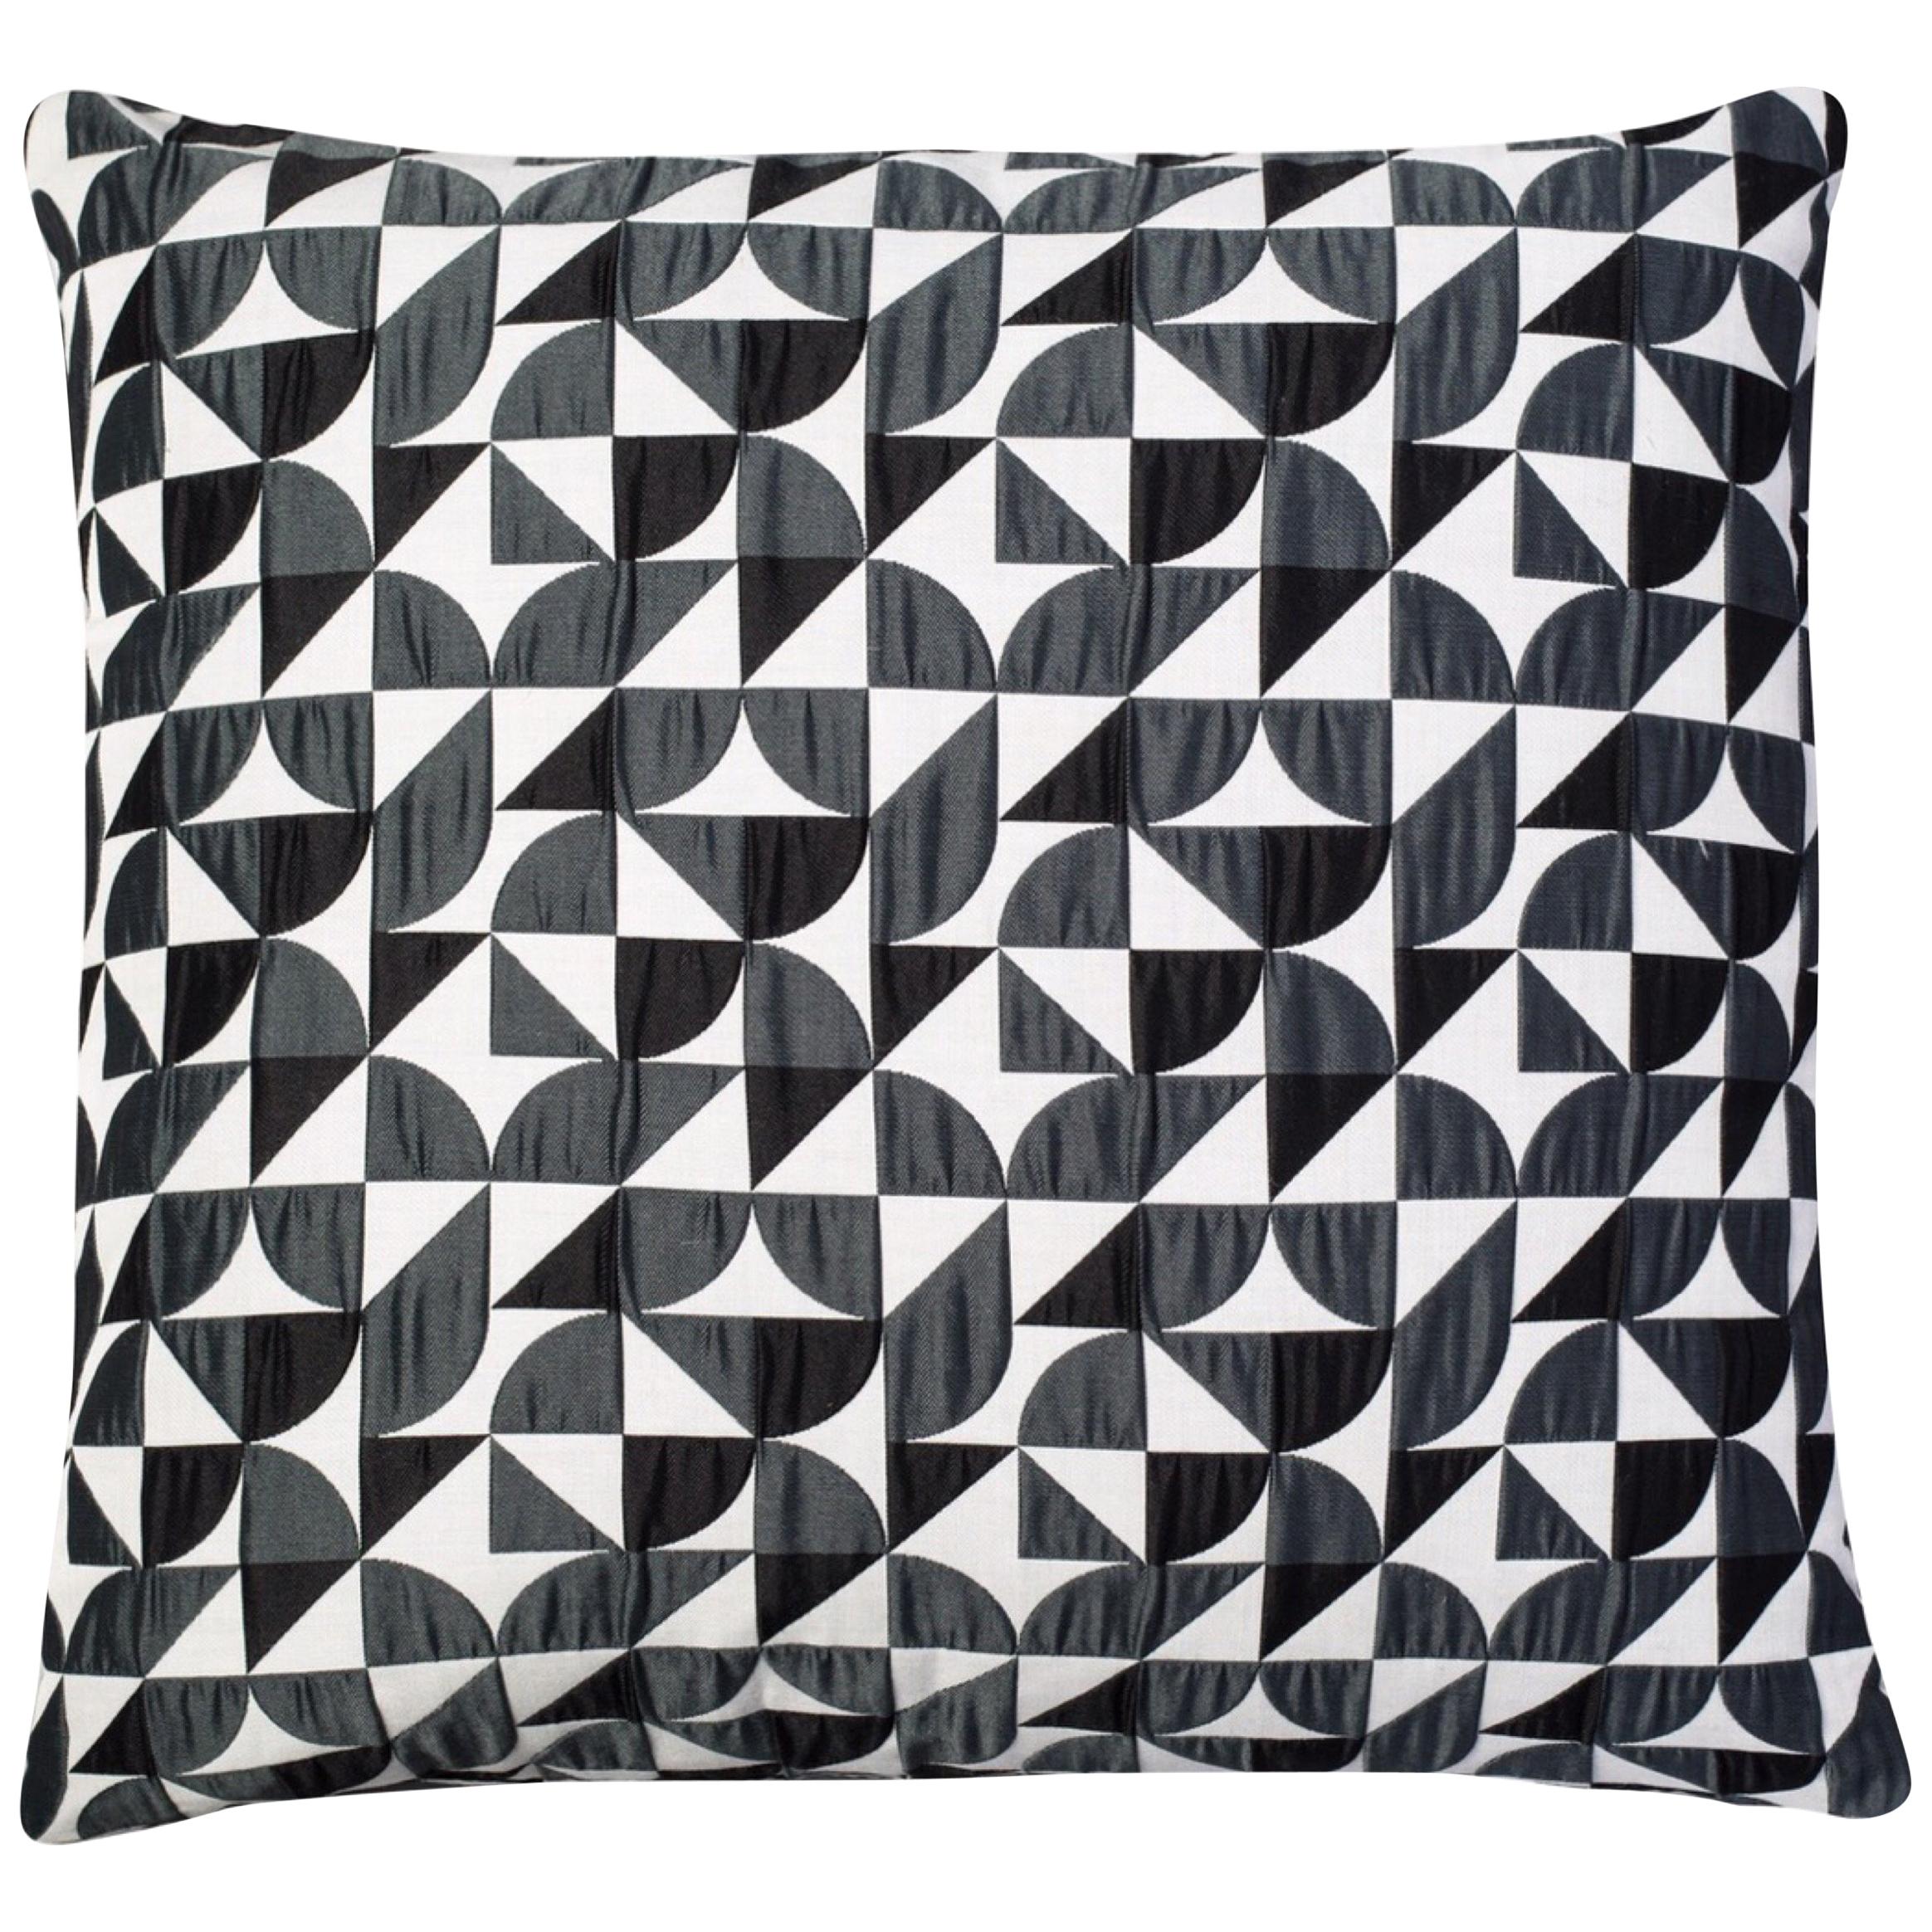 Brasilia Pattern Cushion Curvature Collection Inspired Brazilian Architecture